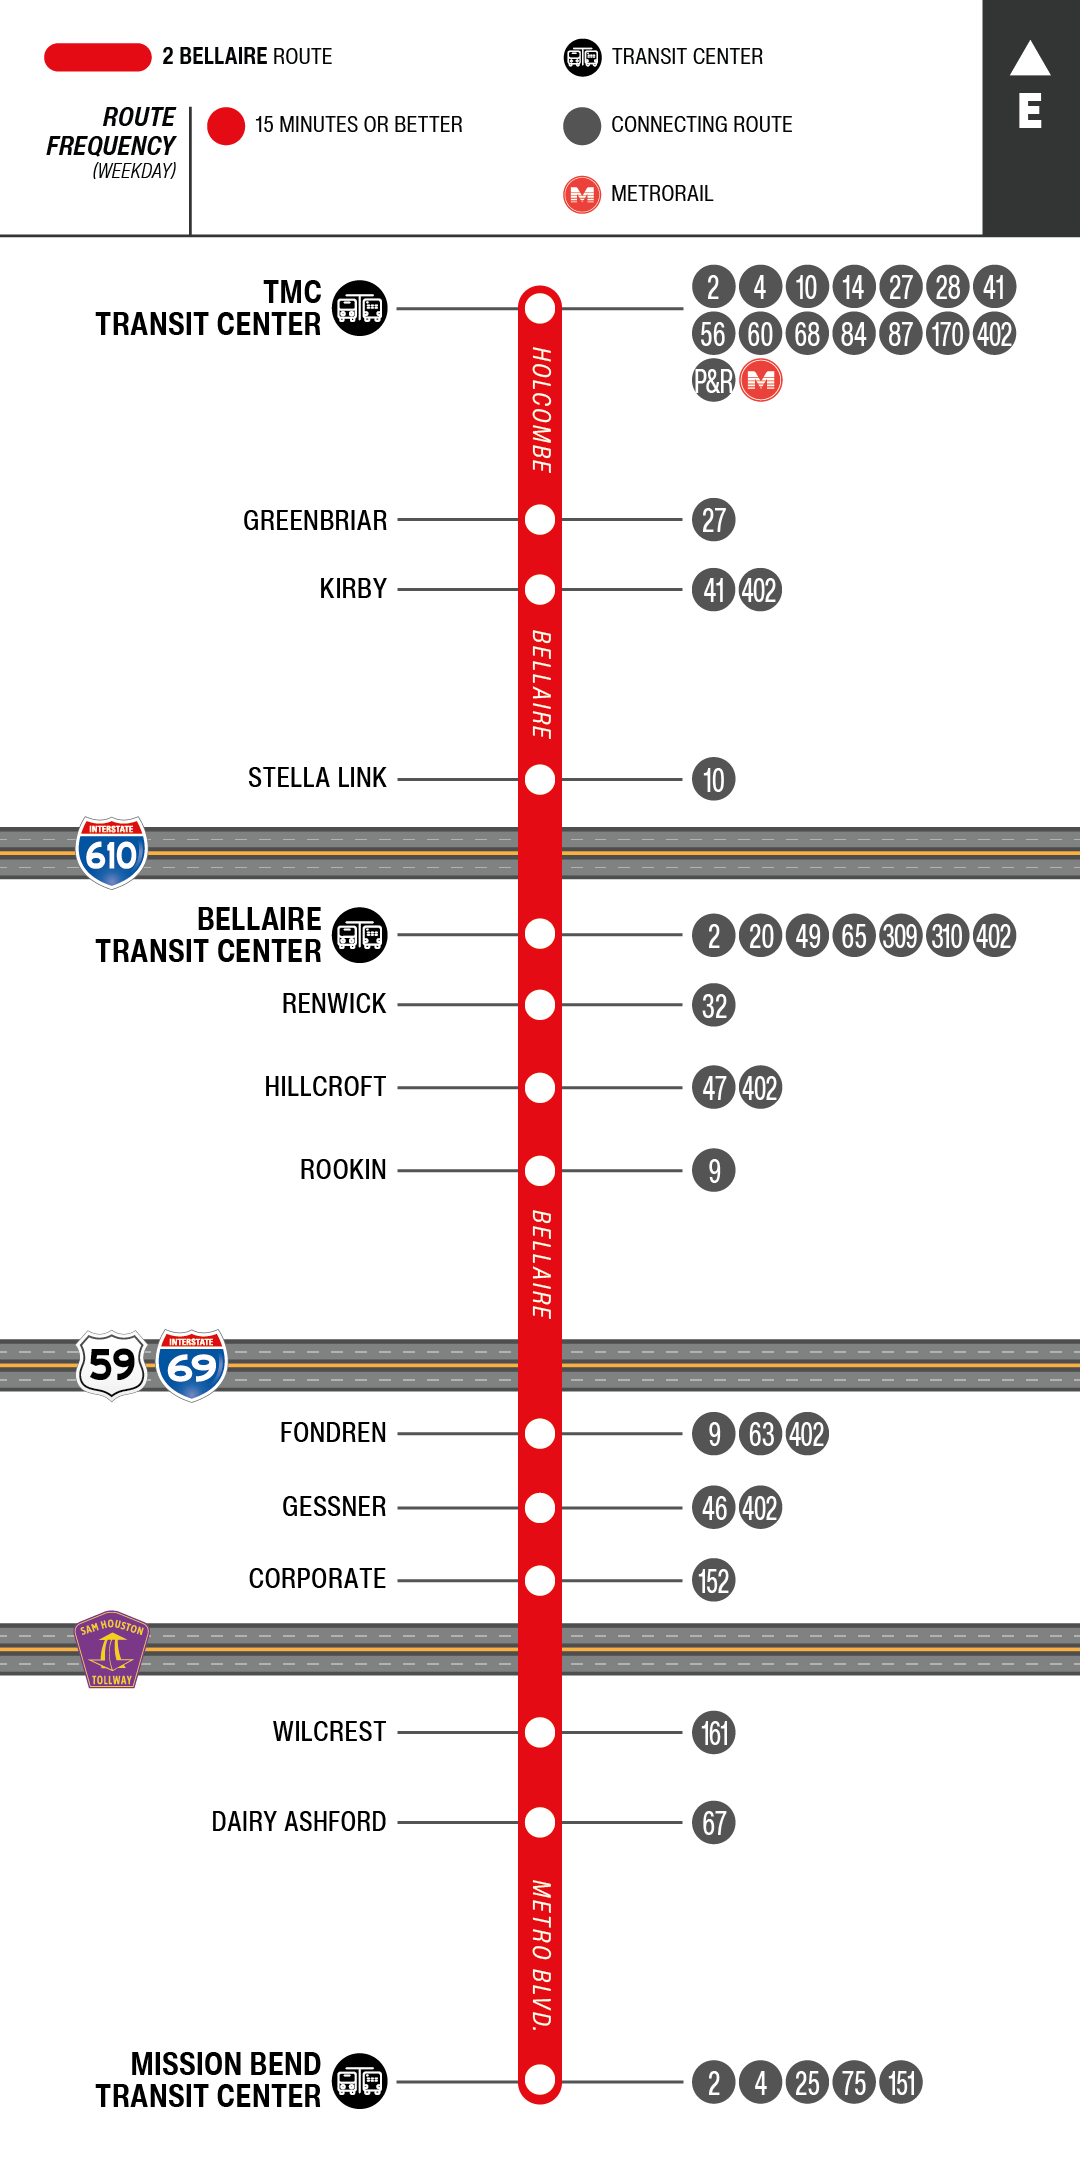 Route map for 2 Bellaire bus